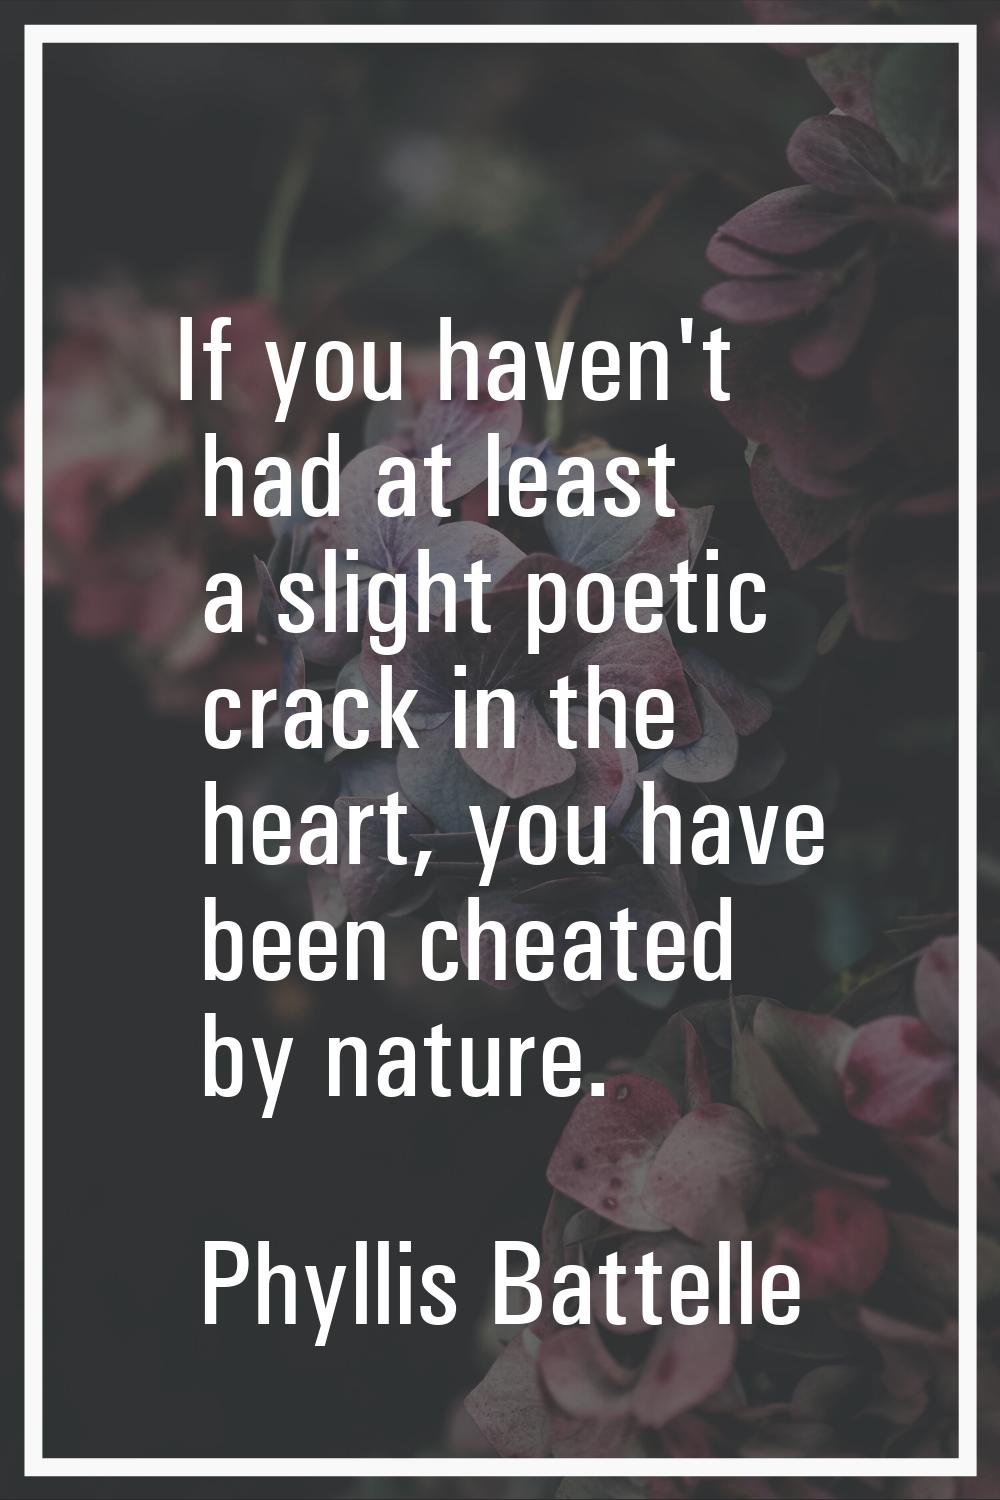 If you haven't had at least a slight poetic crack in the heart, you have been cheated by nature.